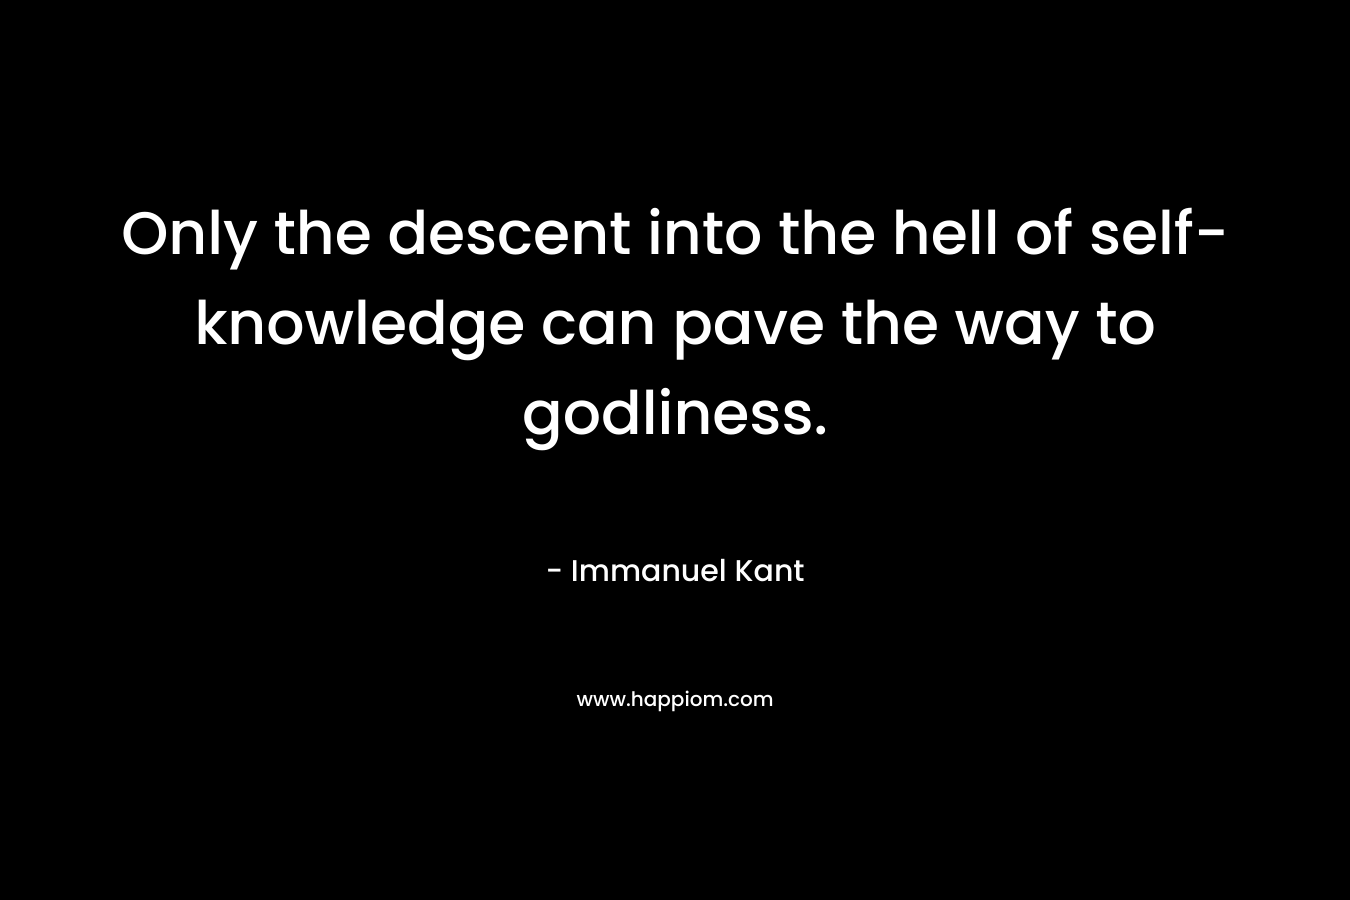 Only the descent into the hell of self-knowledge can pave the way to godliness. – Immanuel Kant